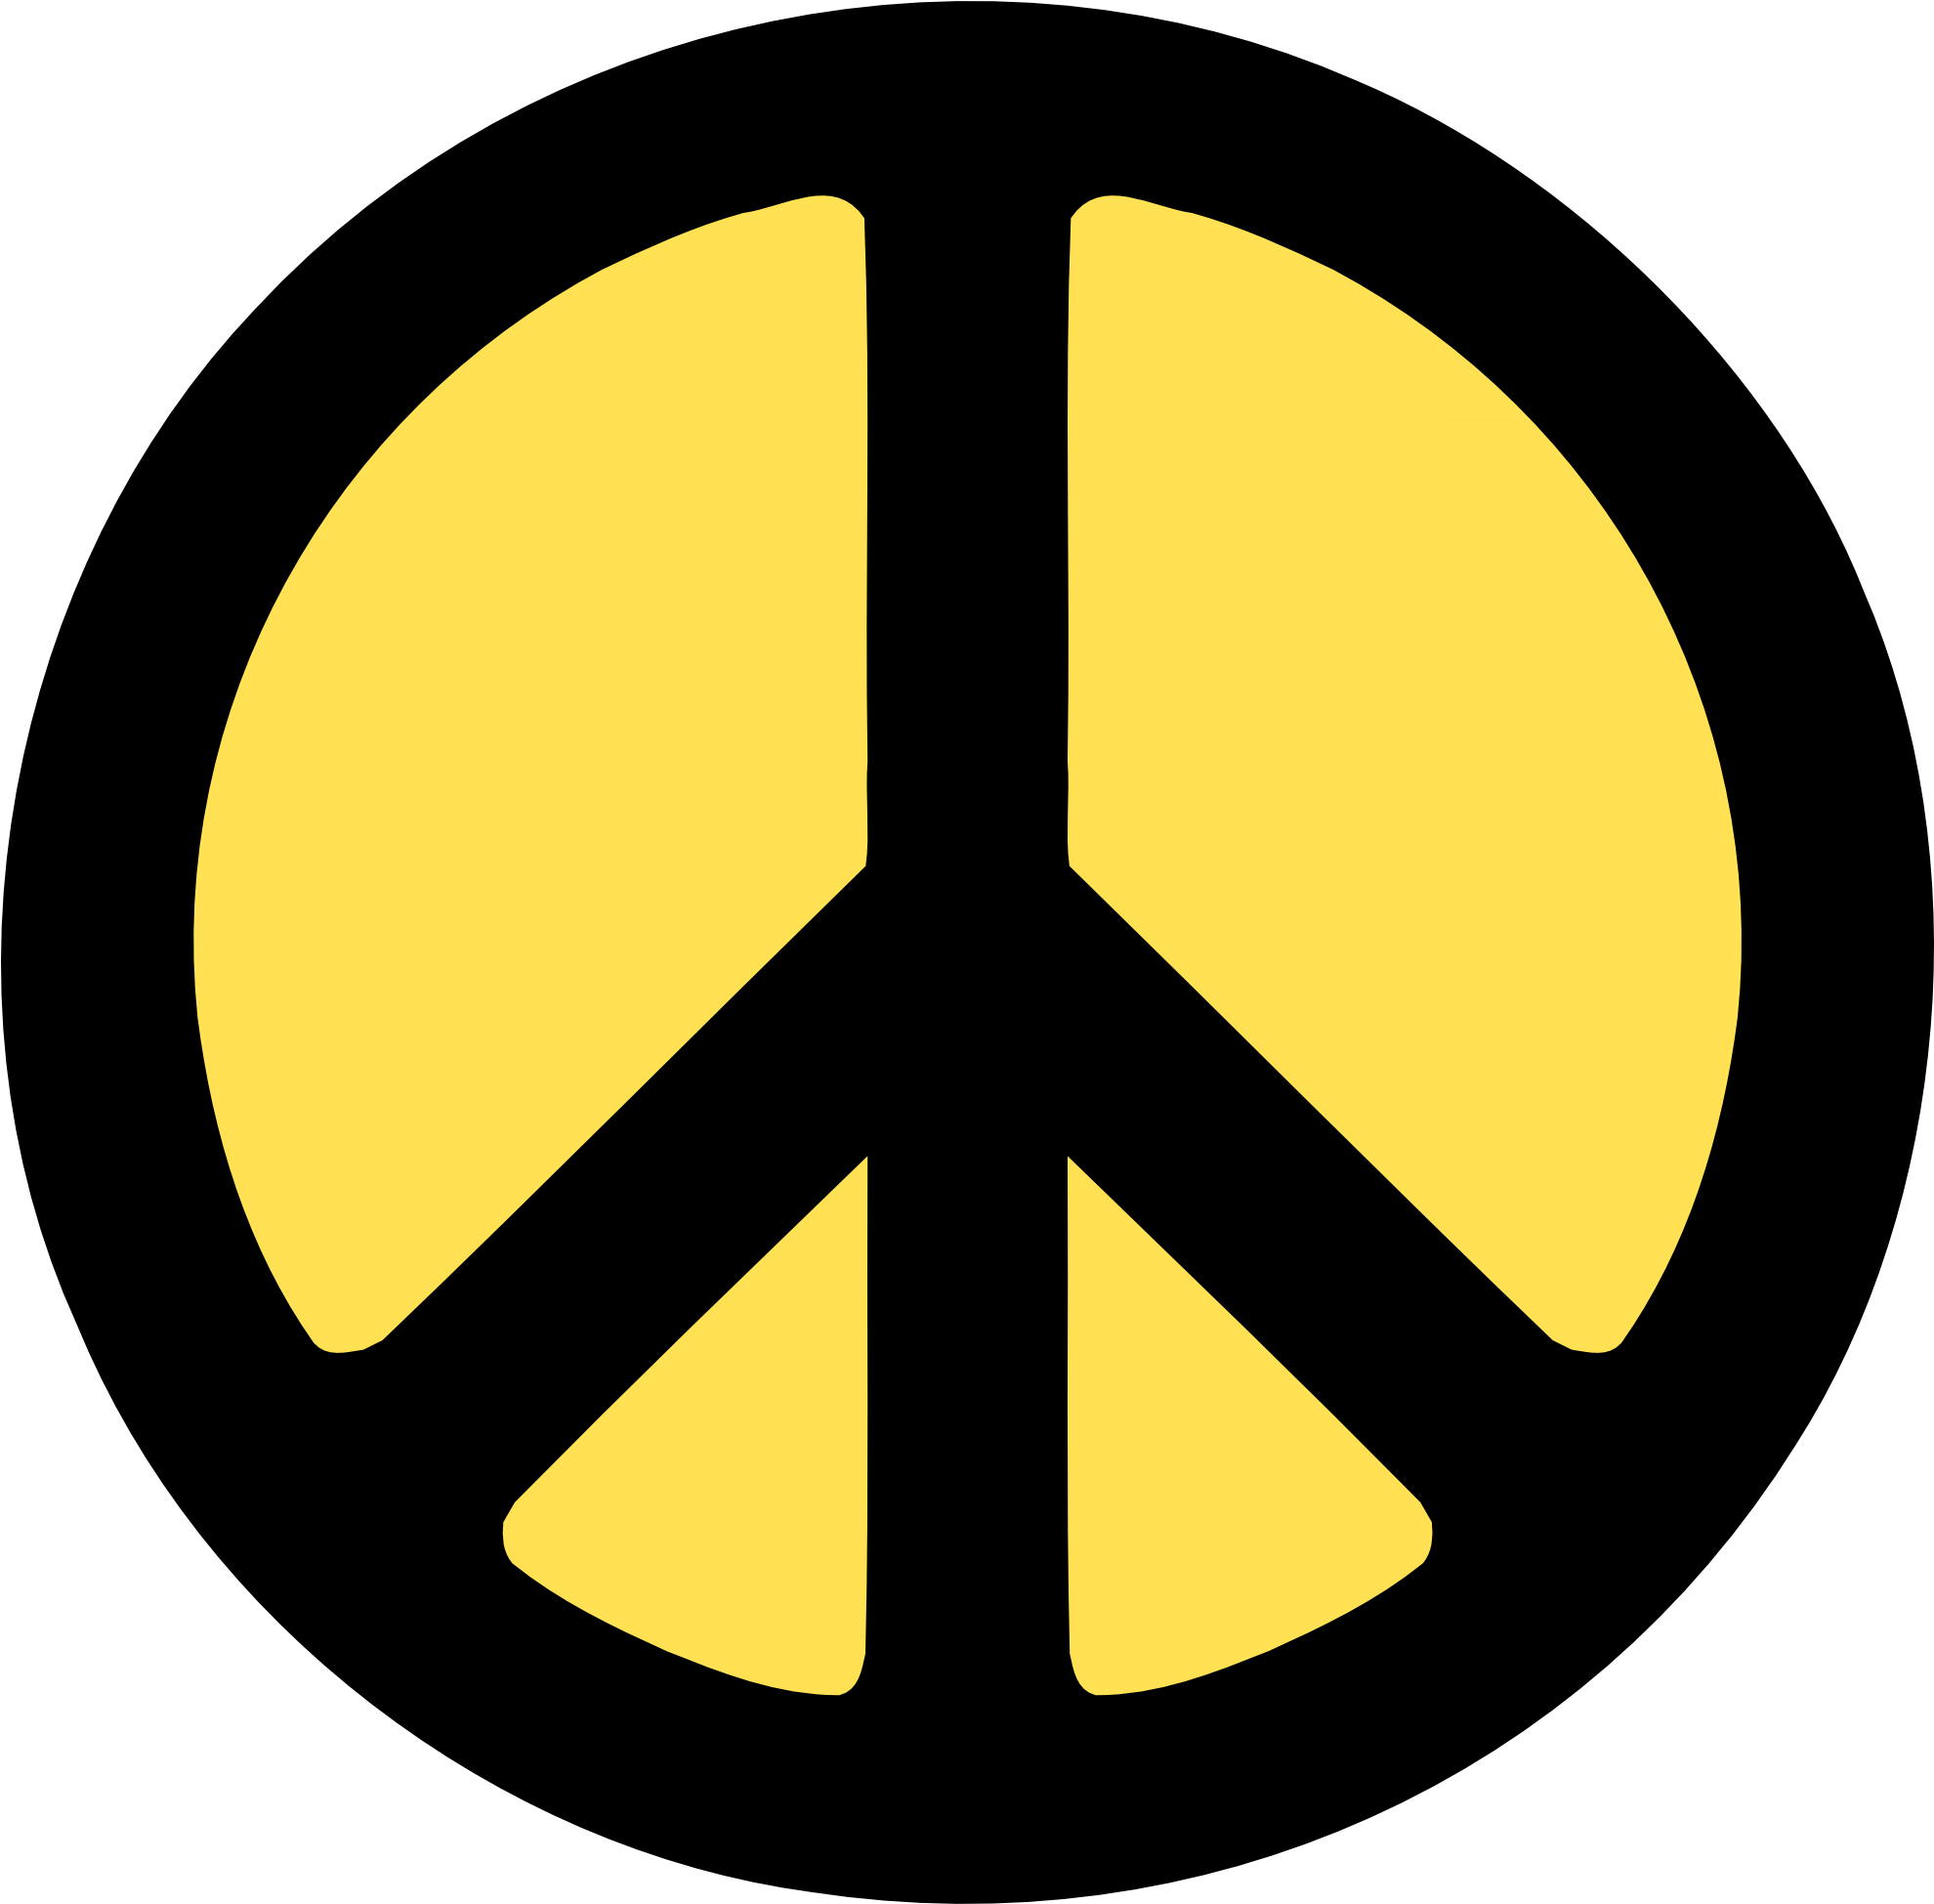 A Yellow Peace Sign With Black Lines